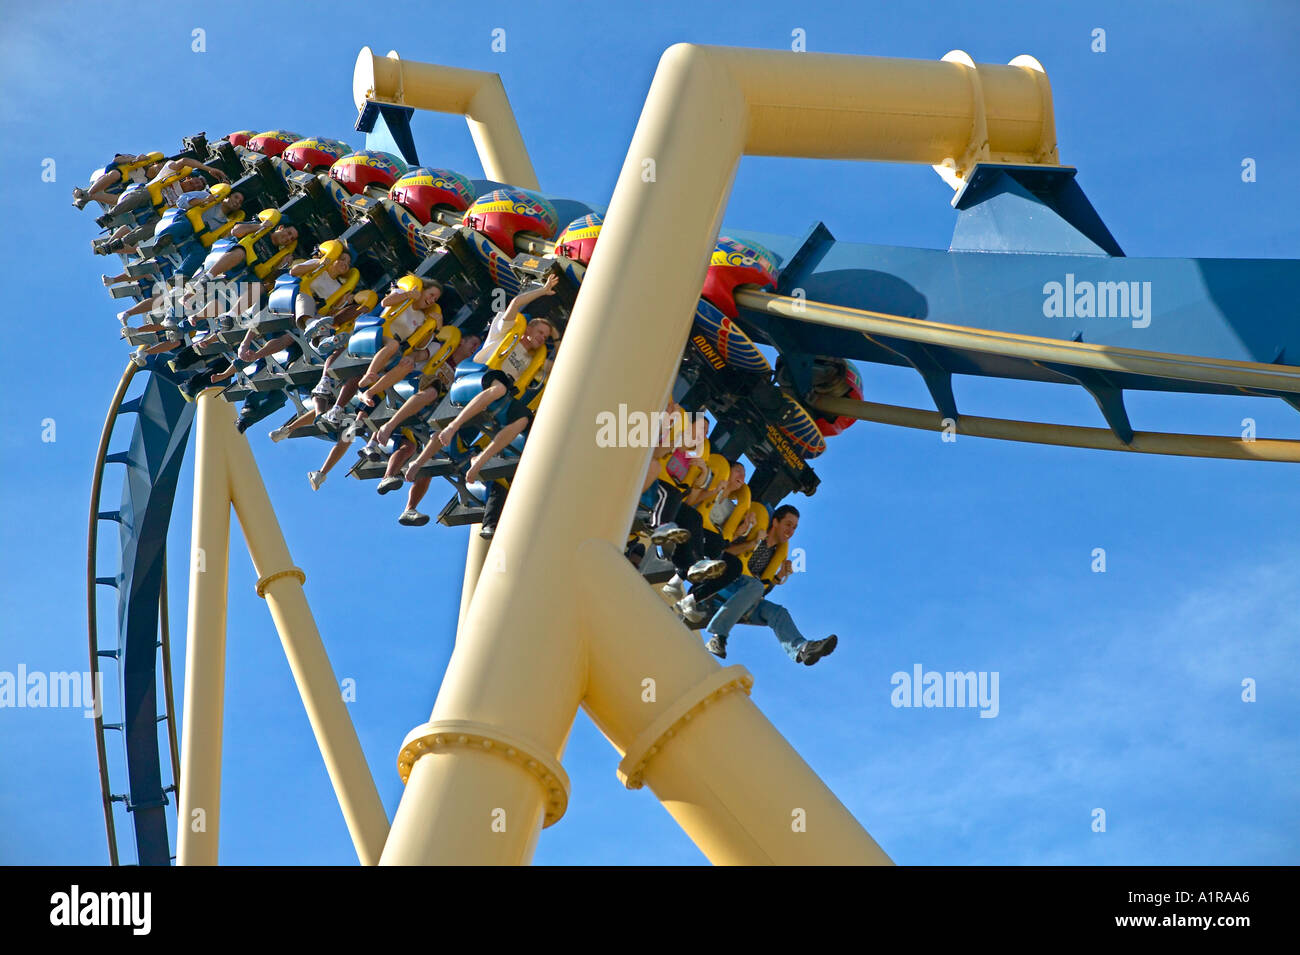 Riders hang suspended from the Montu roller coaster at Busch Garden Tampa  Florida USA Stock Photo - Alamy